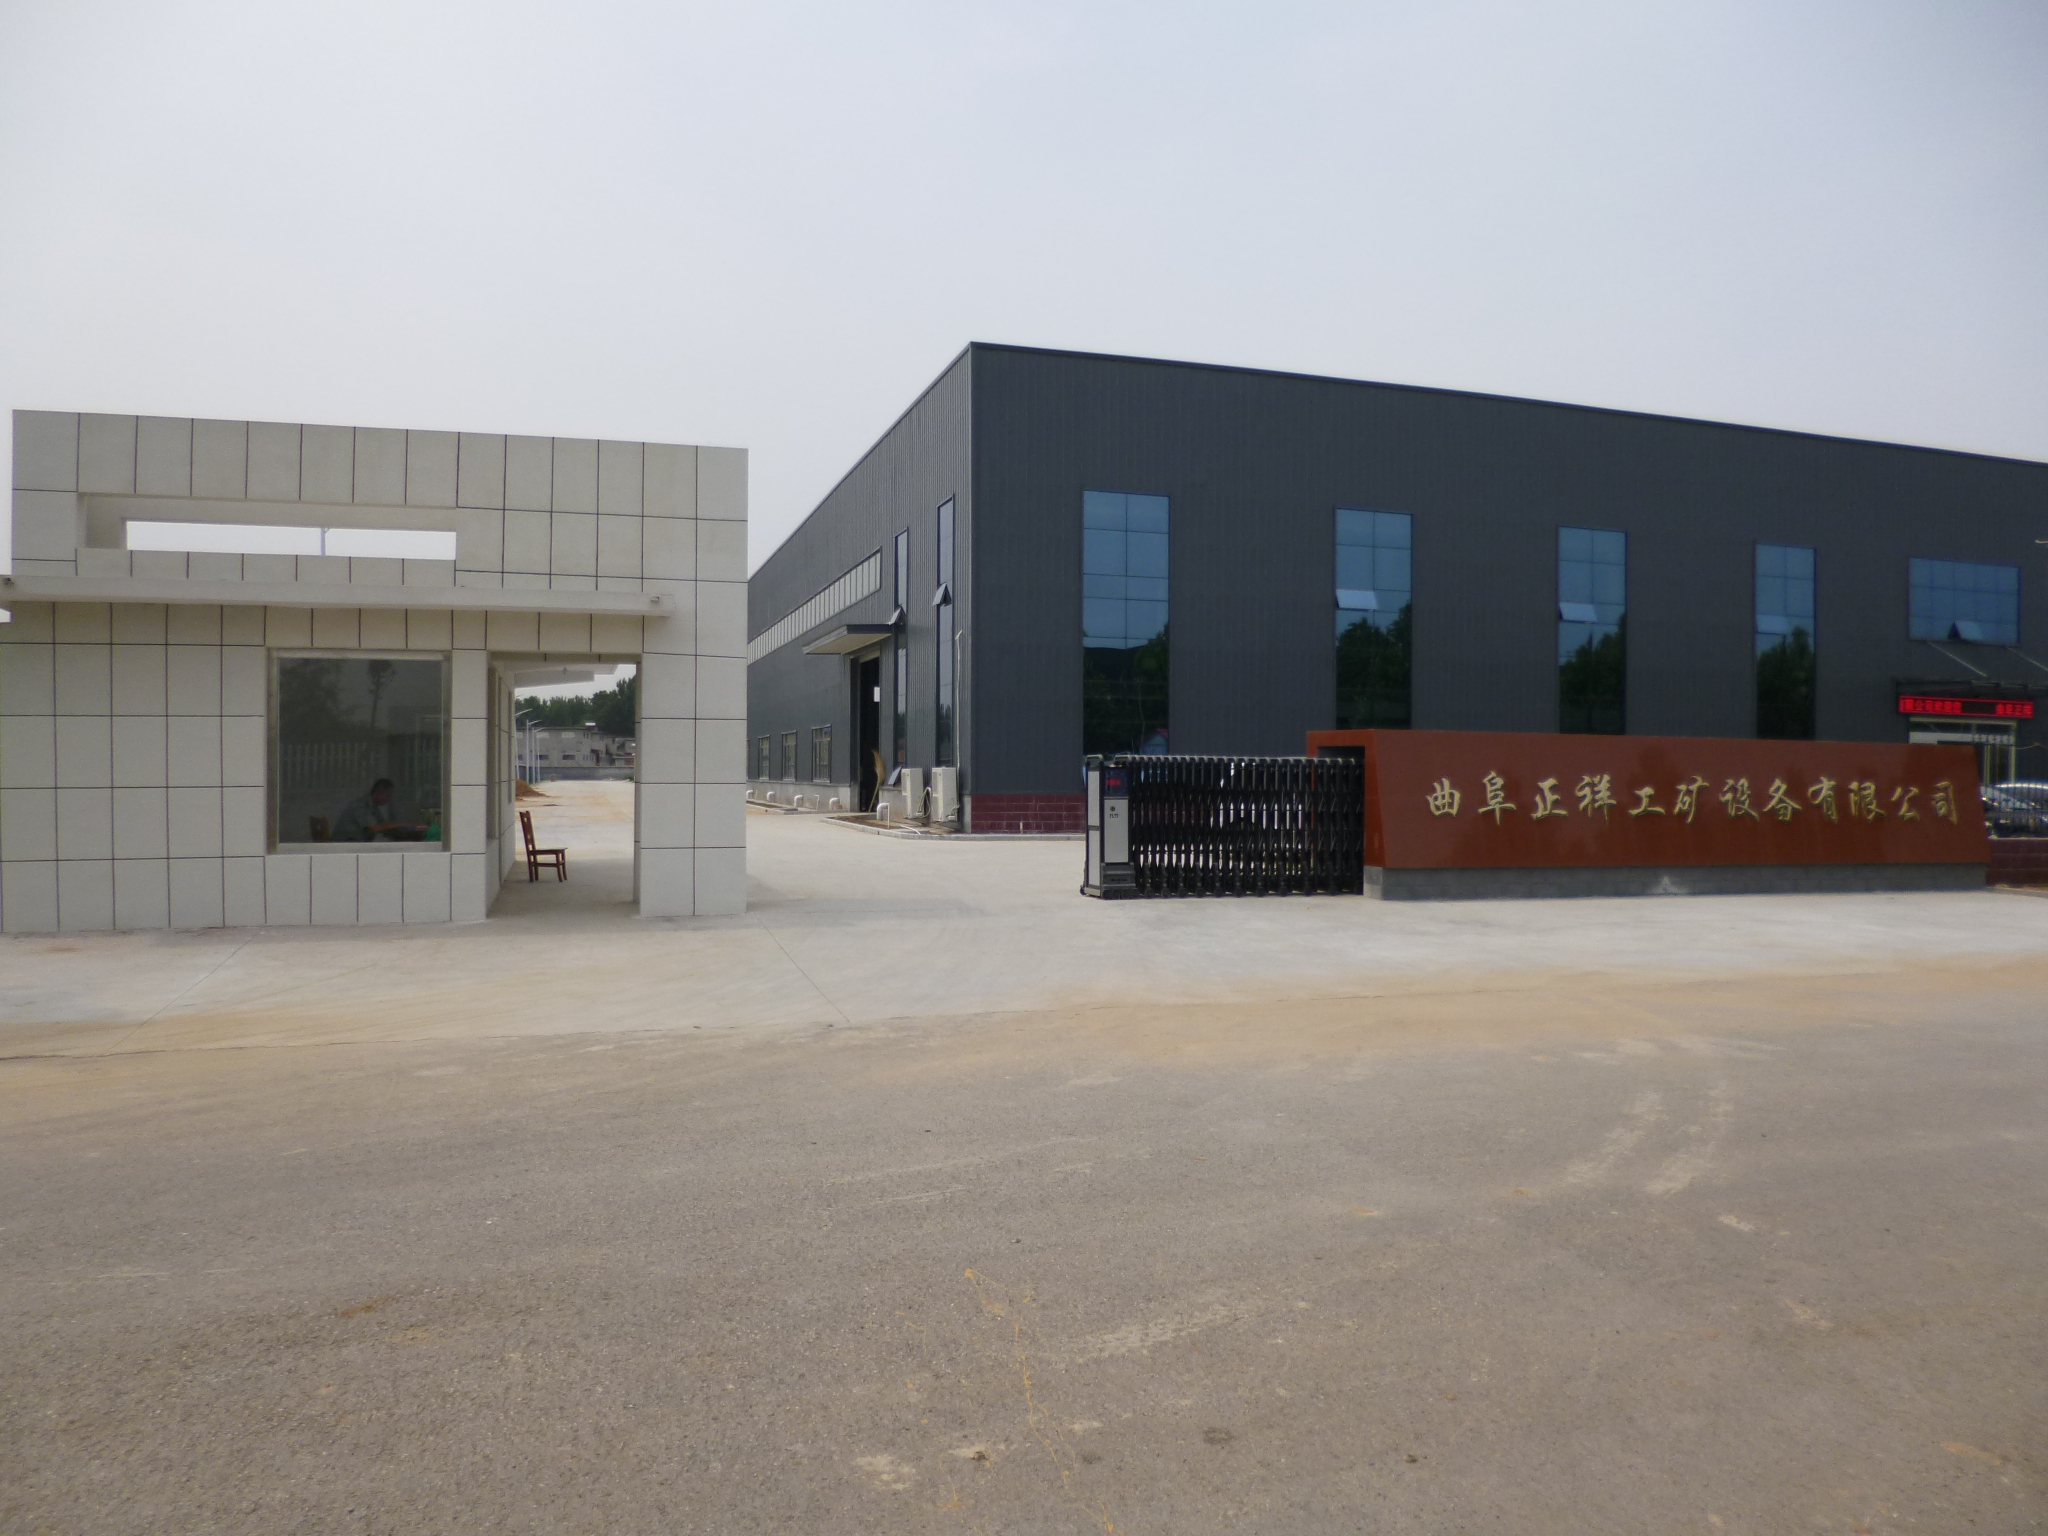 Shandong Zhengxiang Industrial and Mining Equipment Co., Ltd. Through the  ISO9001 Quality Management System and ISO14001 Environmental Management System Dual Certification